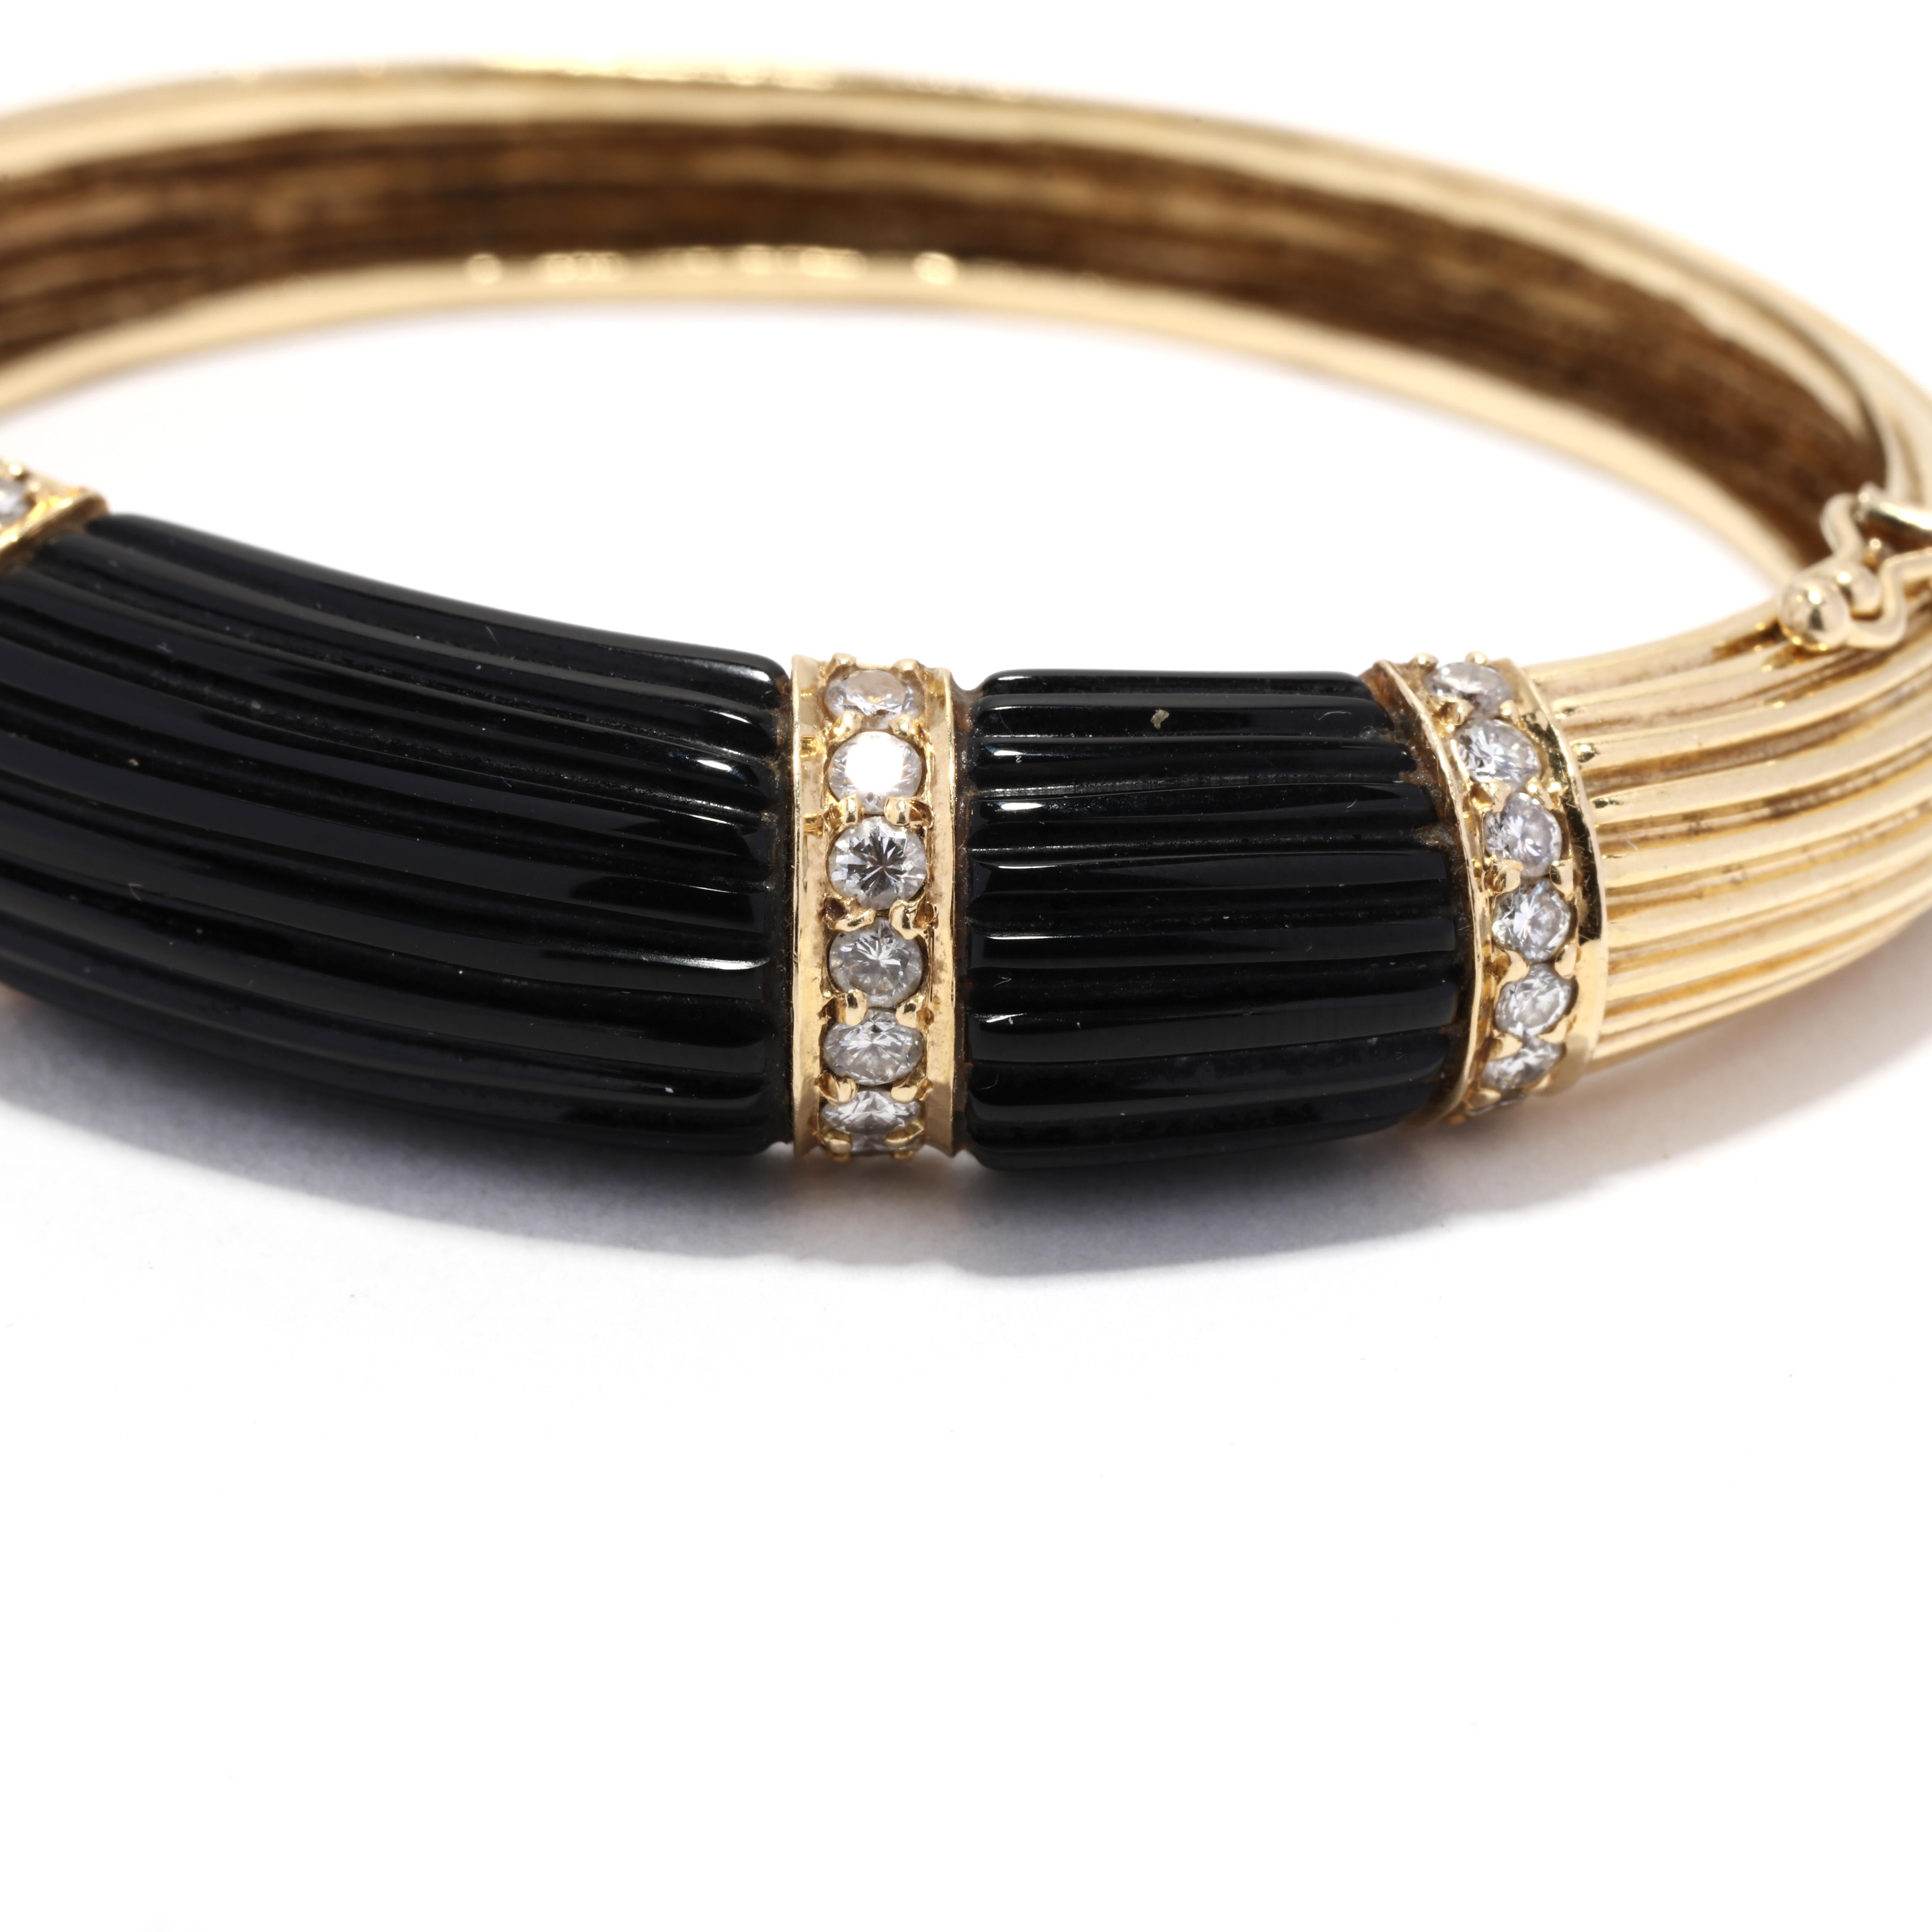 A vintage 18 karat yellow gold diamond and carved black onyx hinged bangle bracelet. This heavy gold bracelet features a tapered design with three pieces of horizontally carved black onyx stations with shared prong, round brilliant cut diamond rows